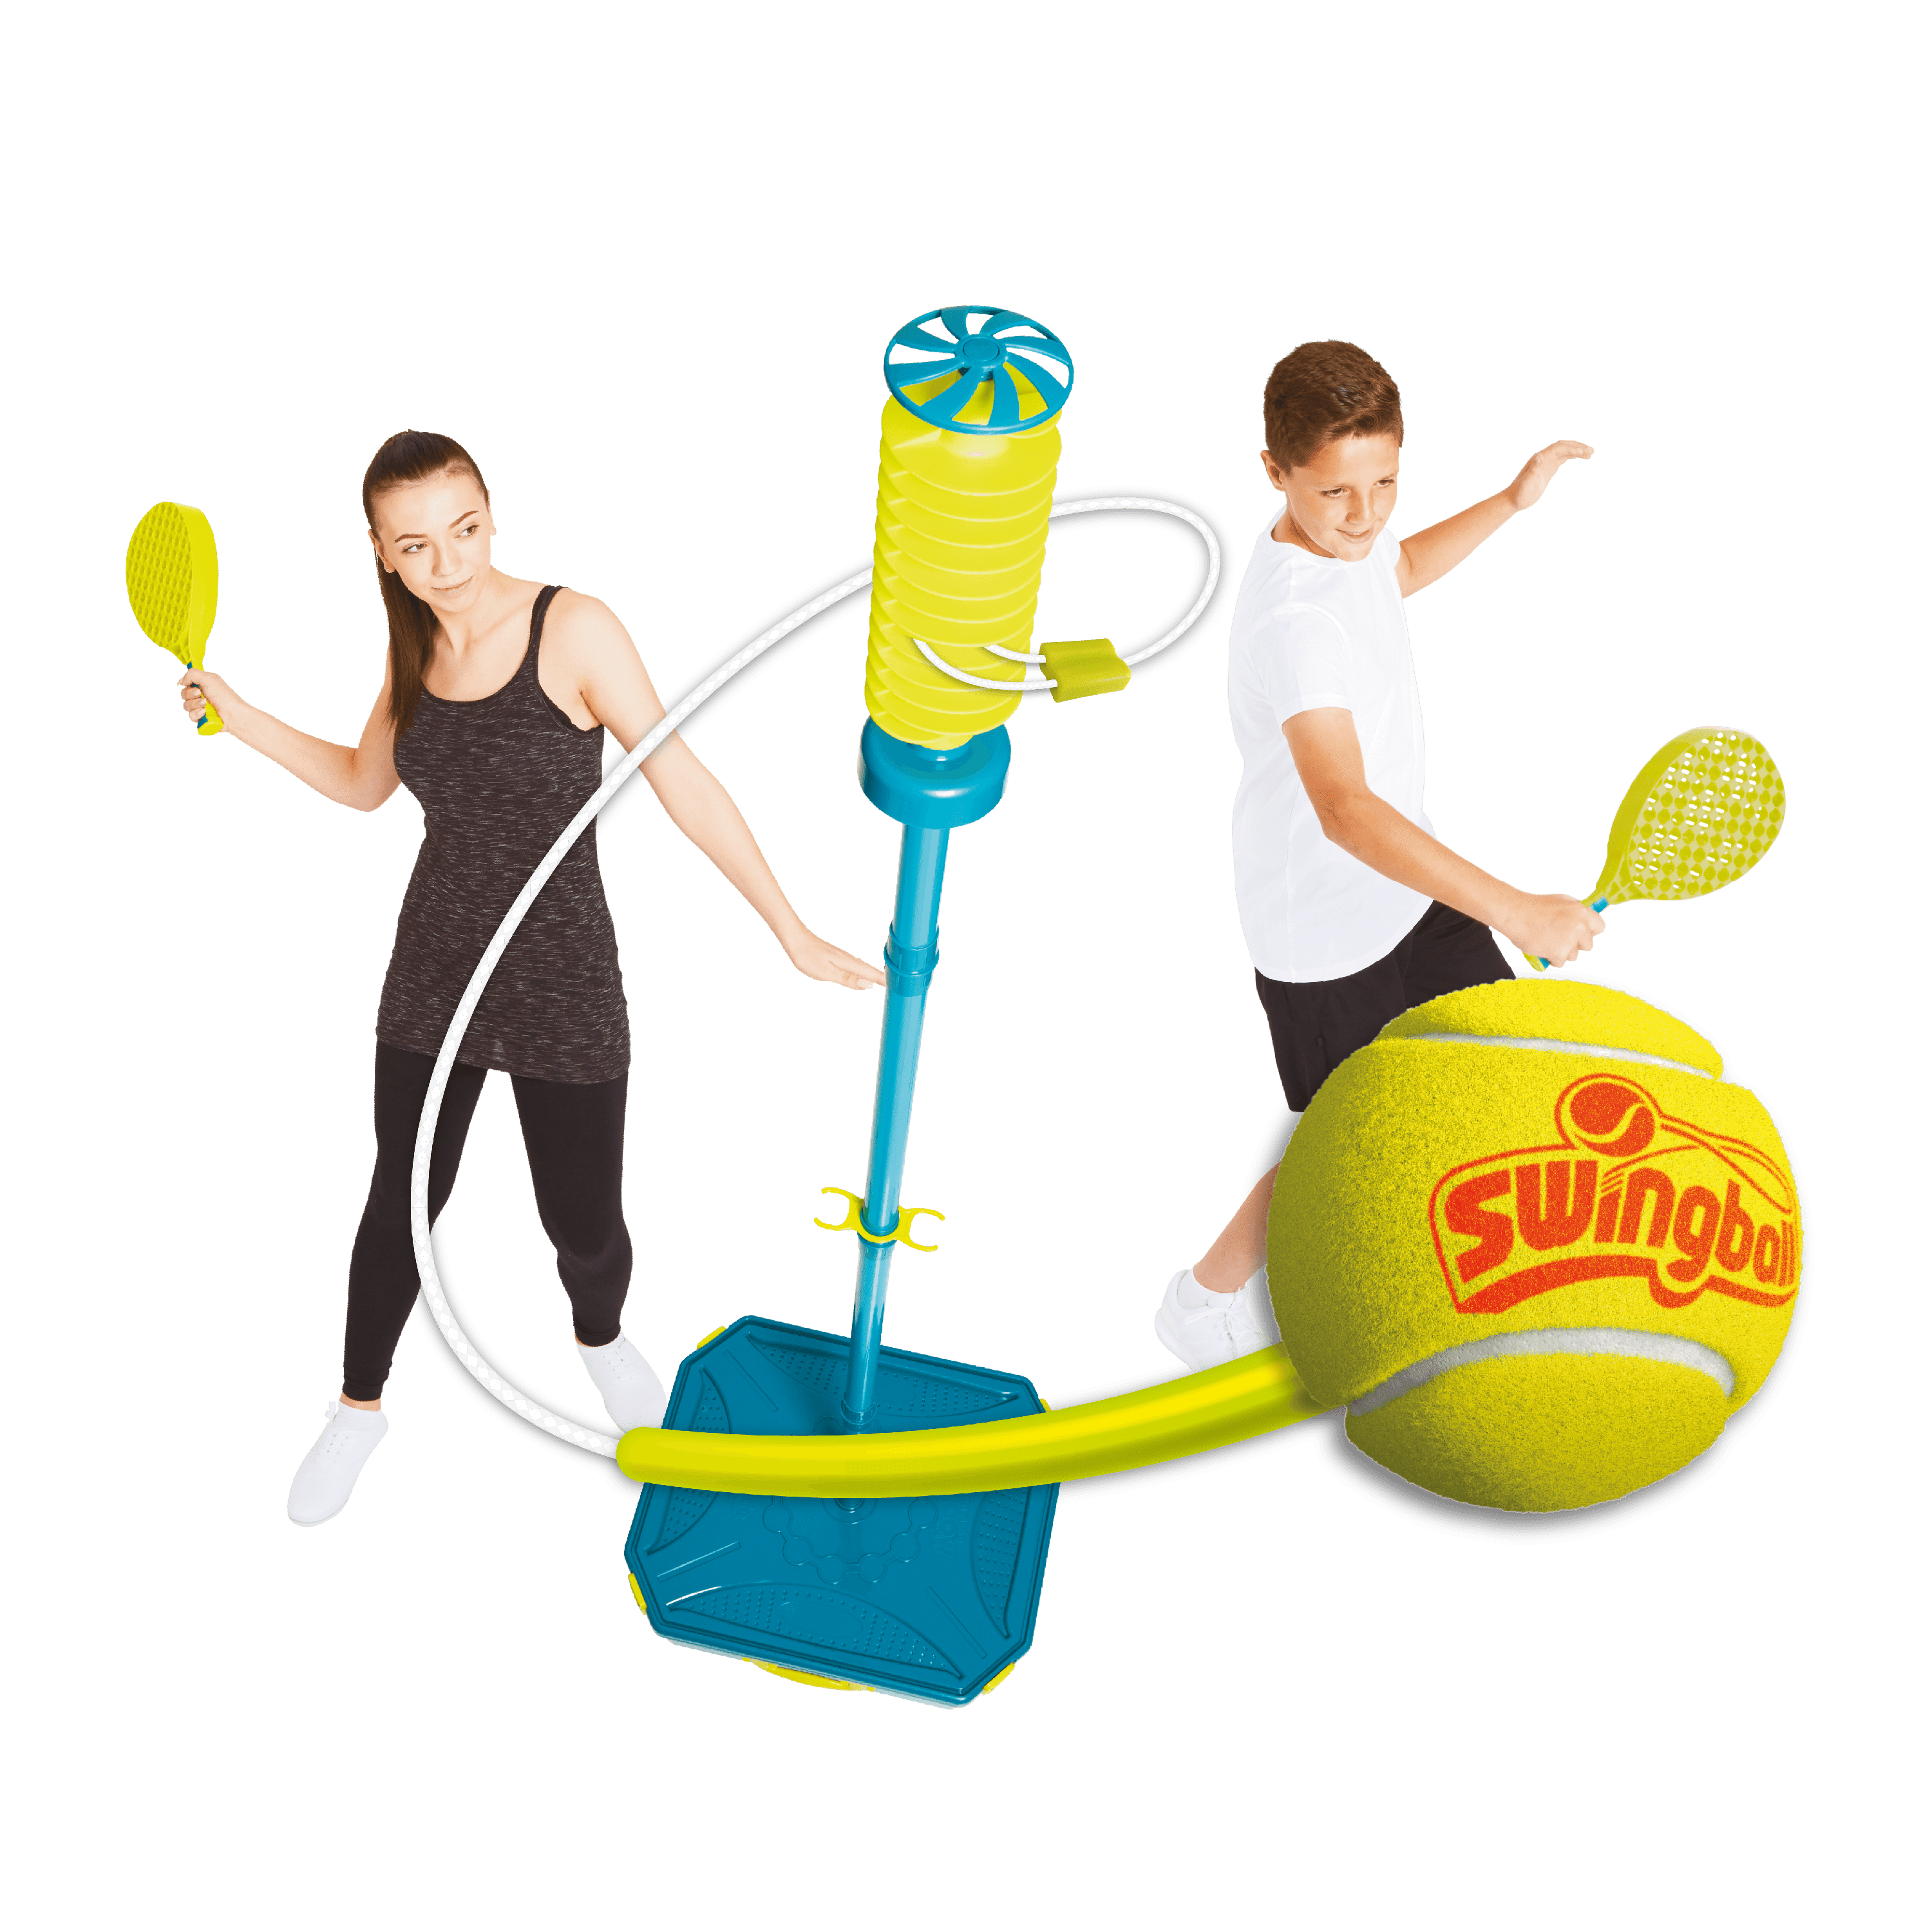 Swing Ball Surface Tether Tennis 72 inch Outdoor Backyard Lawn Game Kids Play 